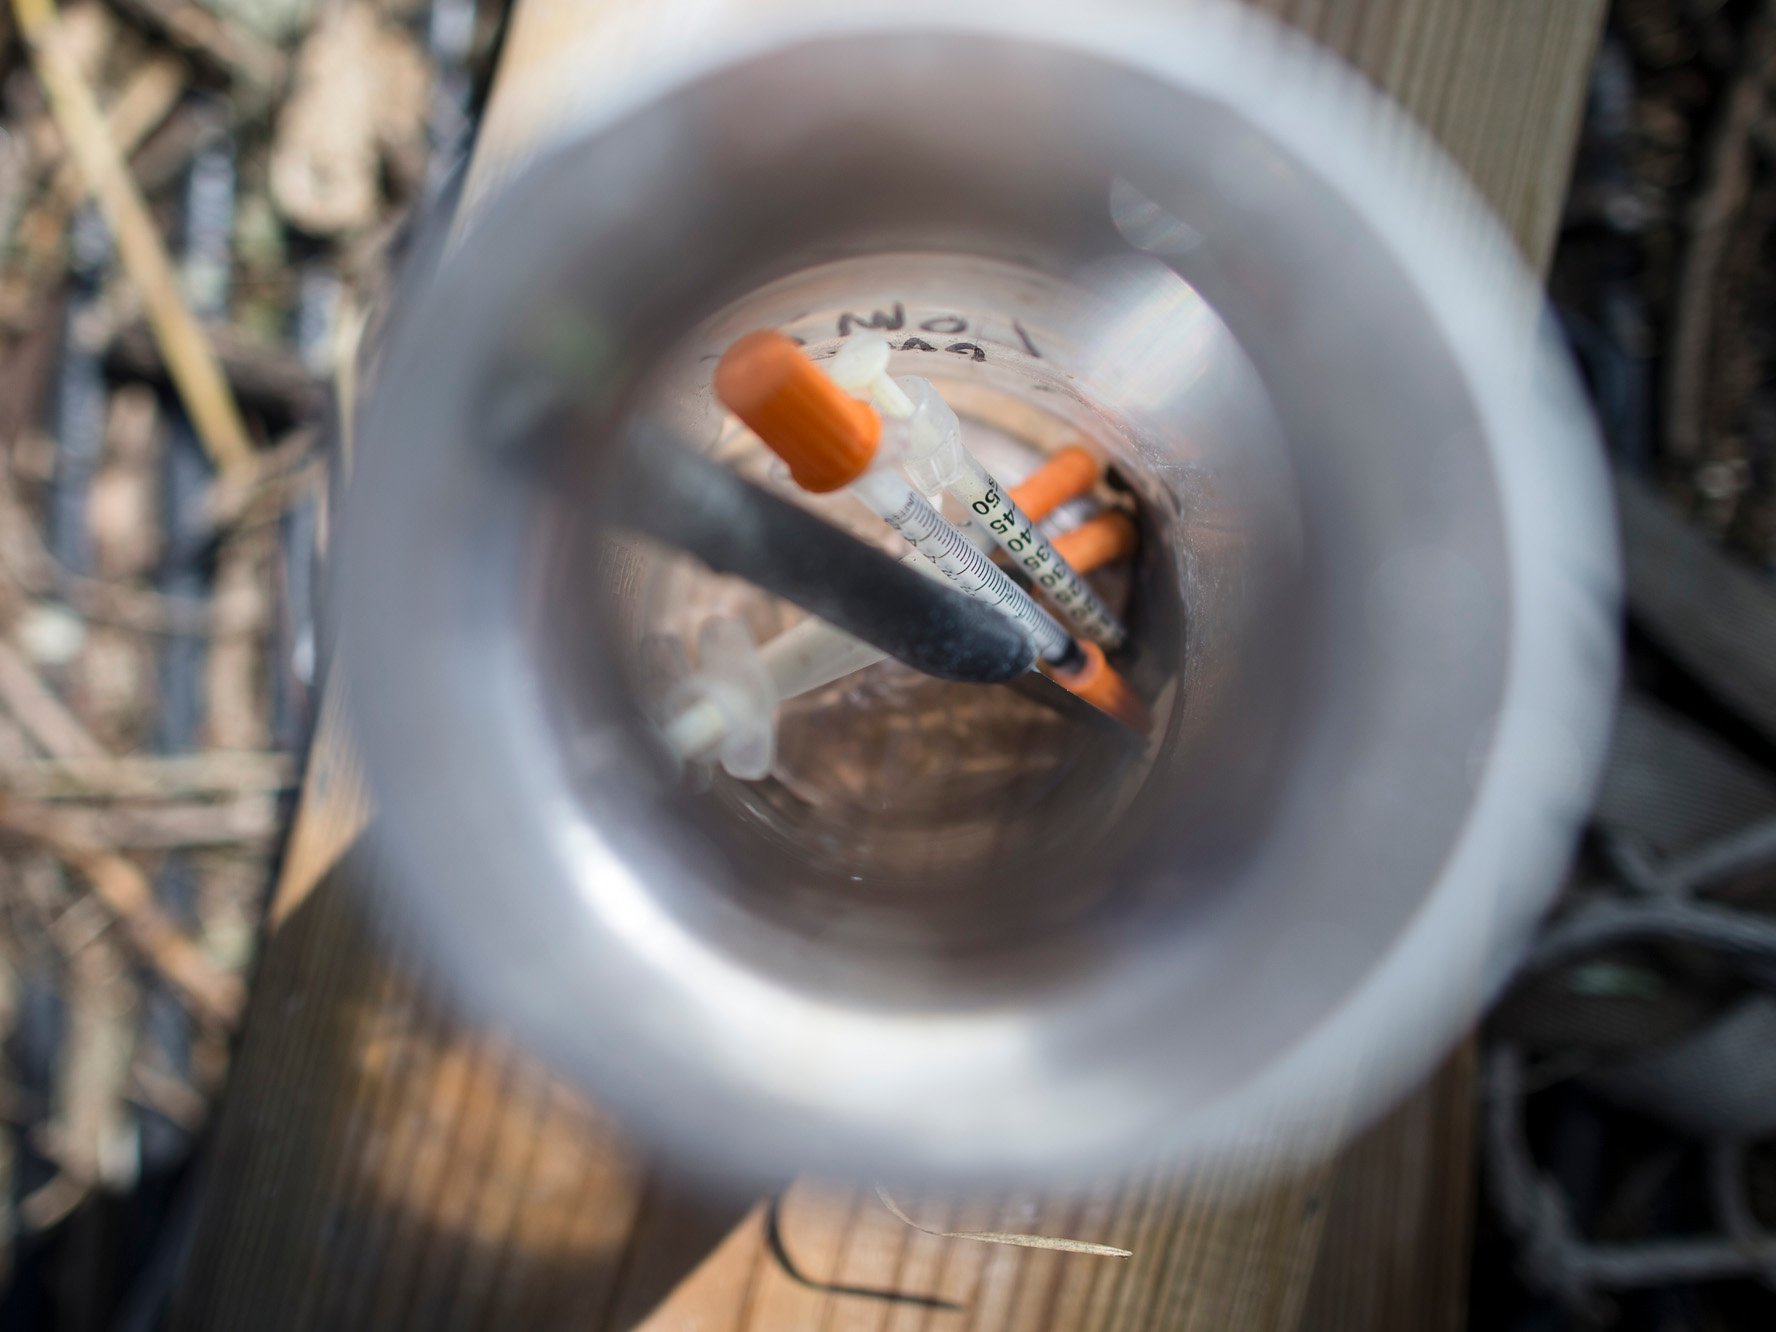 Thousands of discarded syringes show how bad the heroin crisis is ...